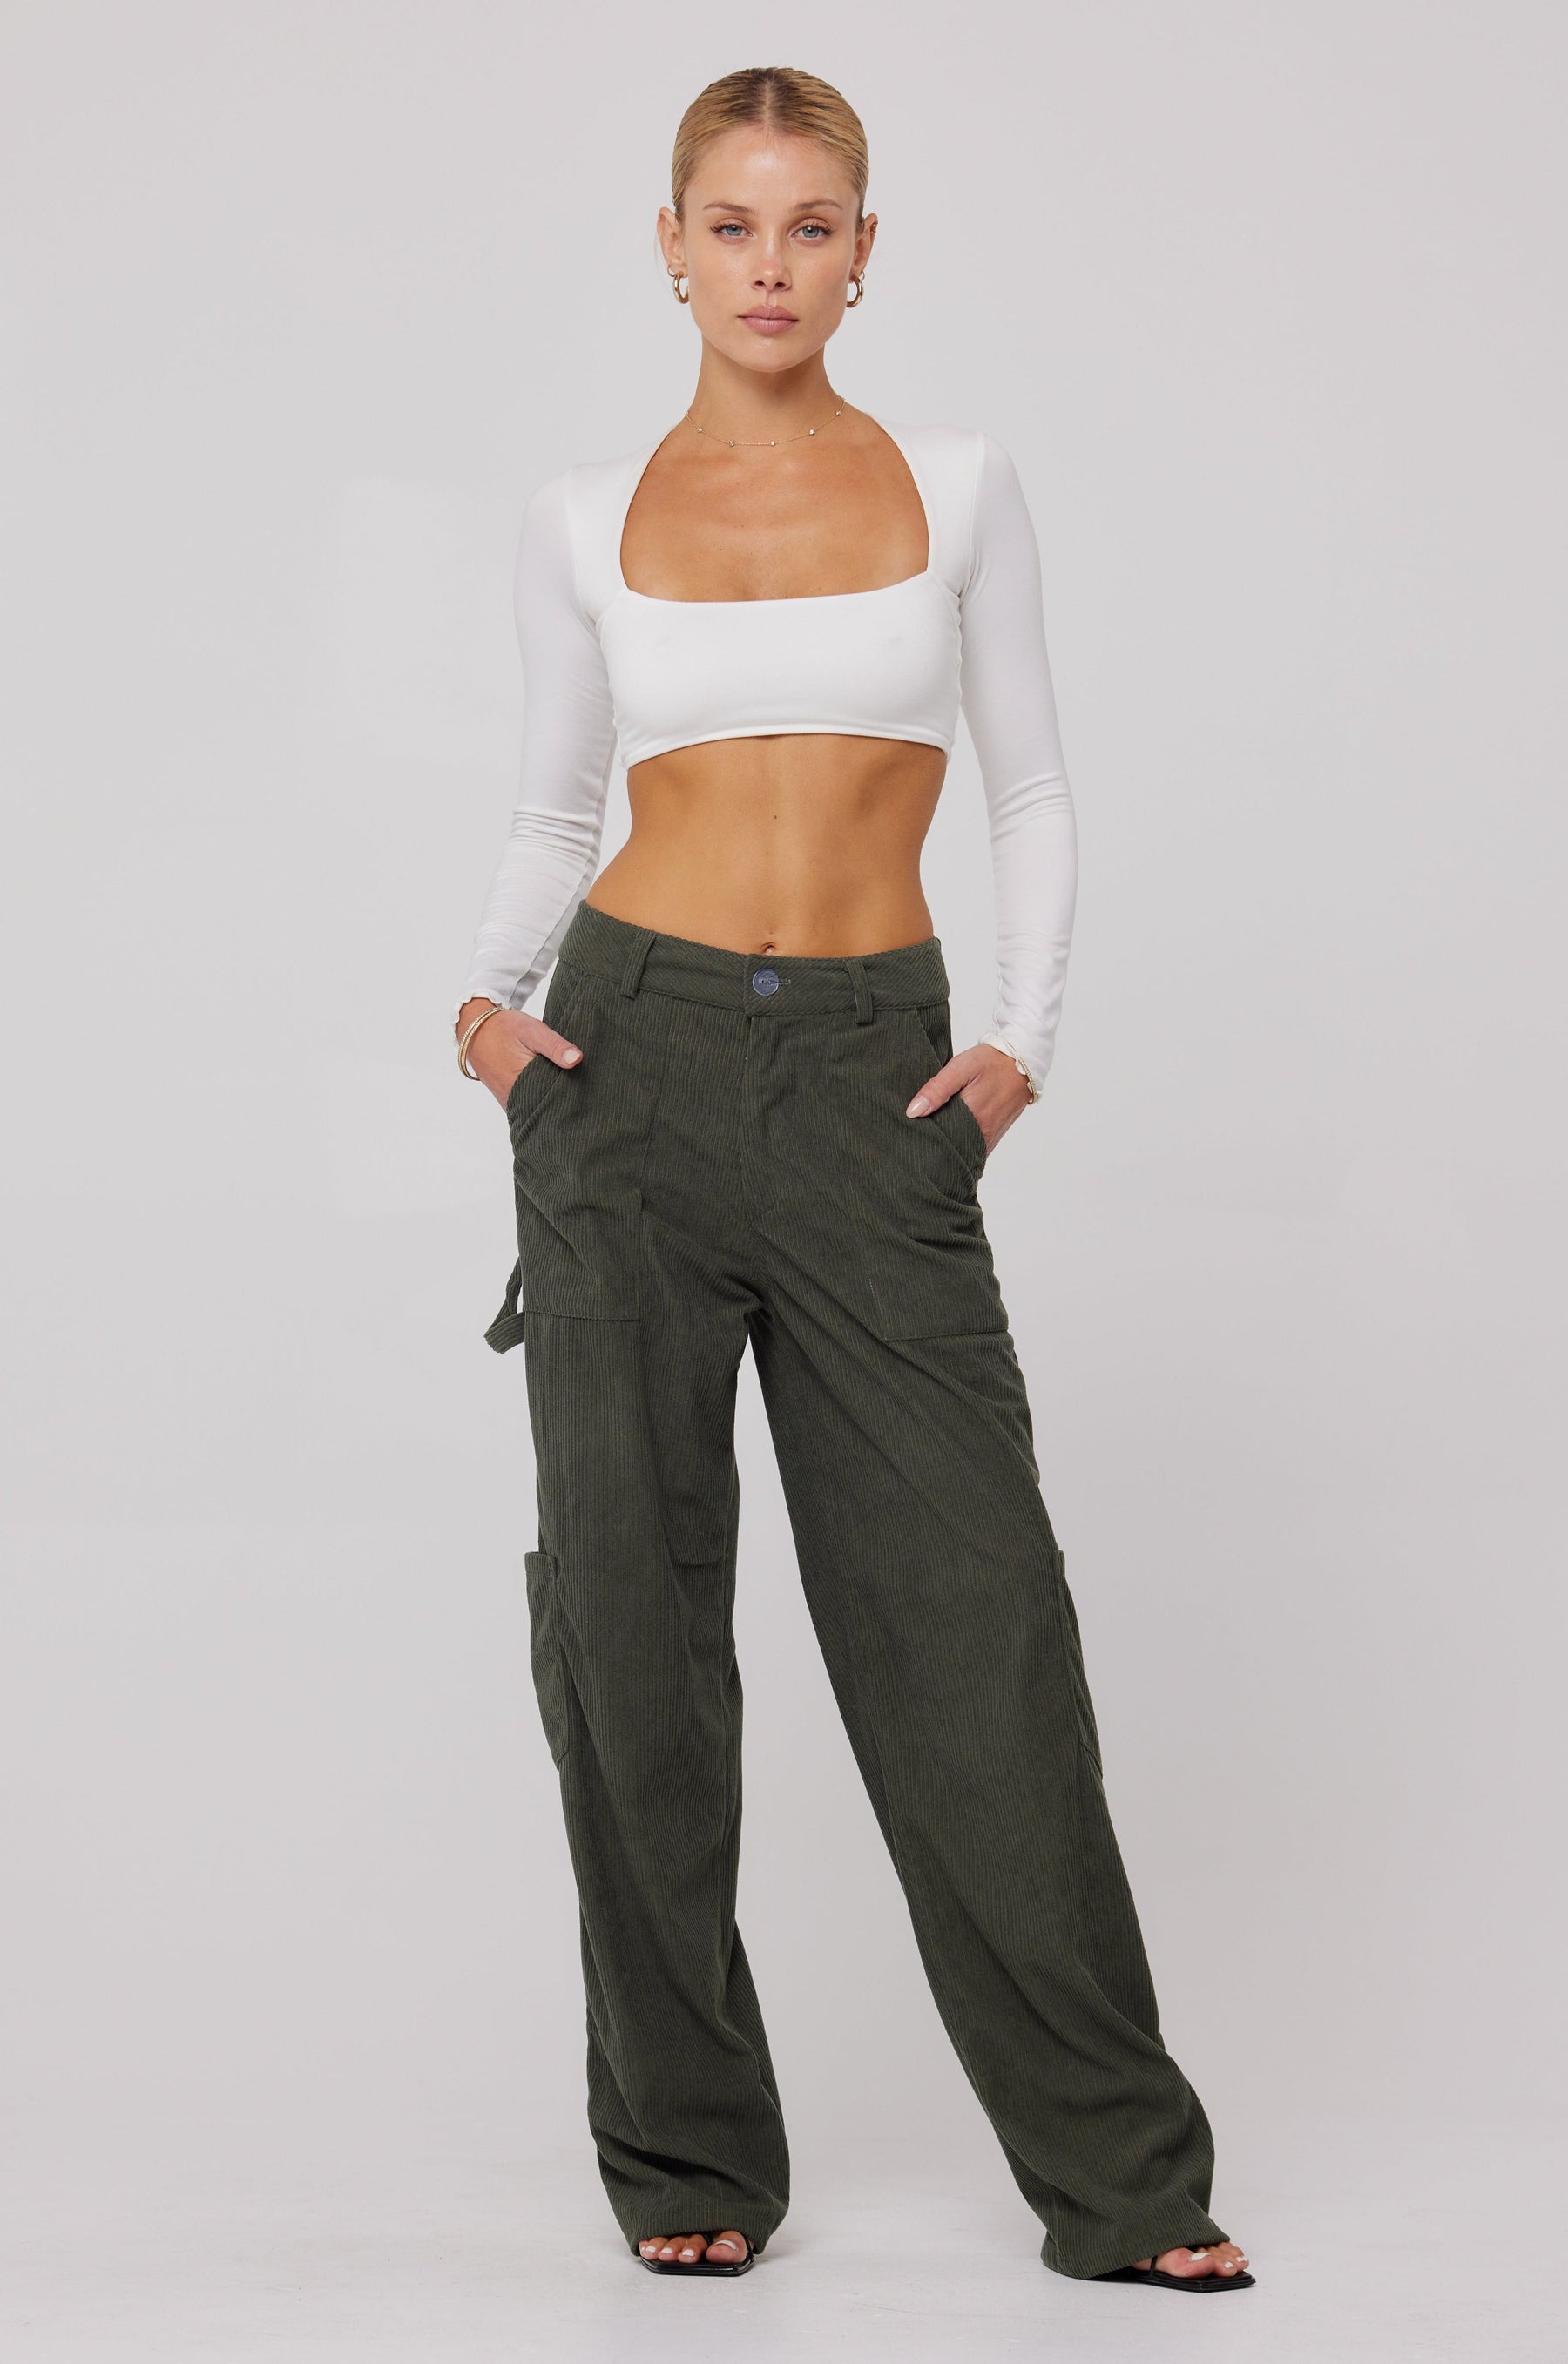 This is an image of Elsa Cargo Pant in Pine - RESA featuring a model wearing the dress